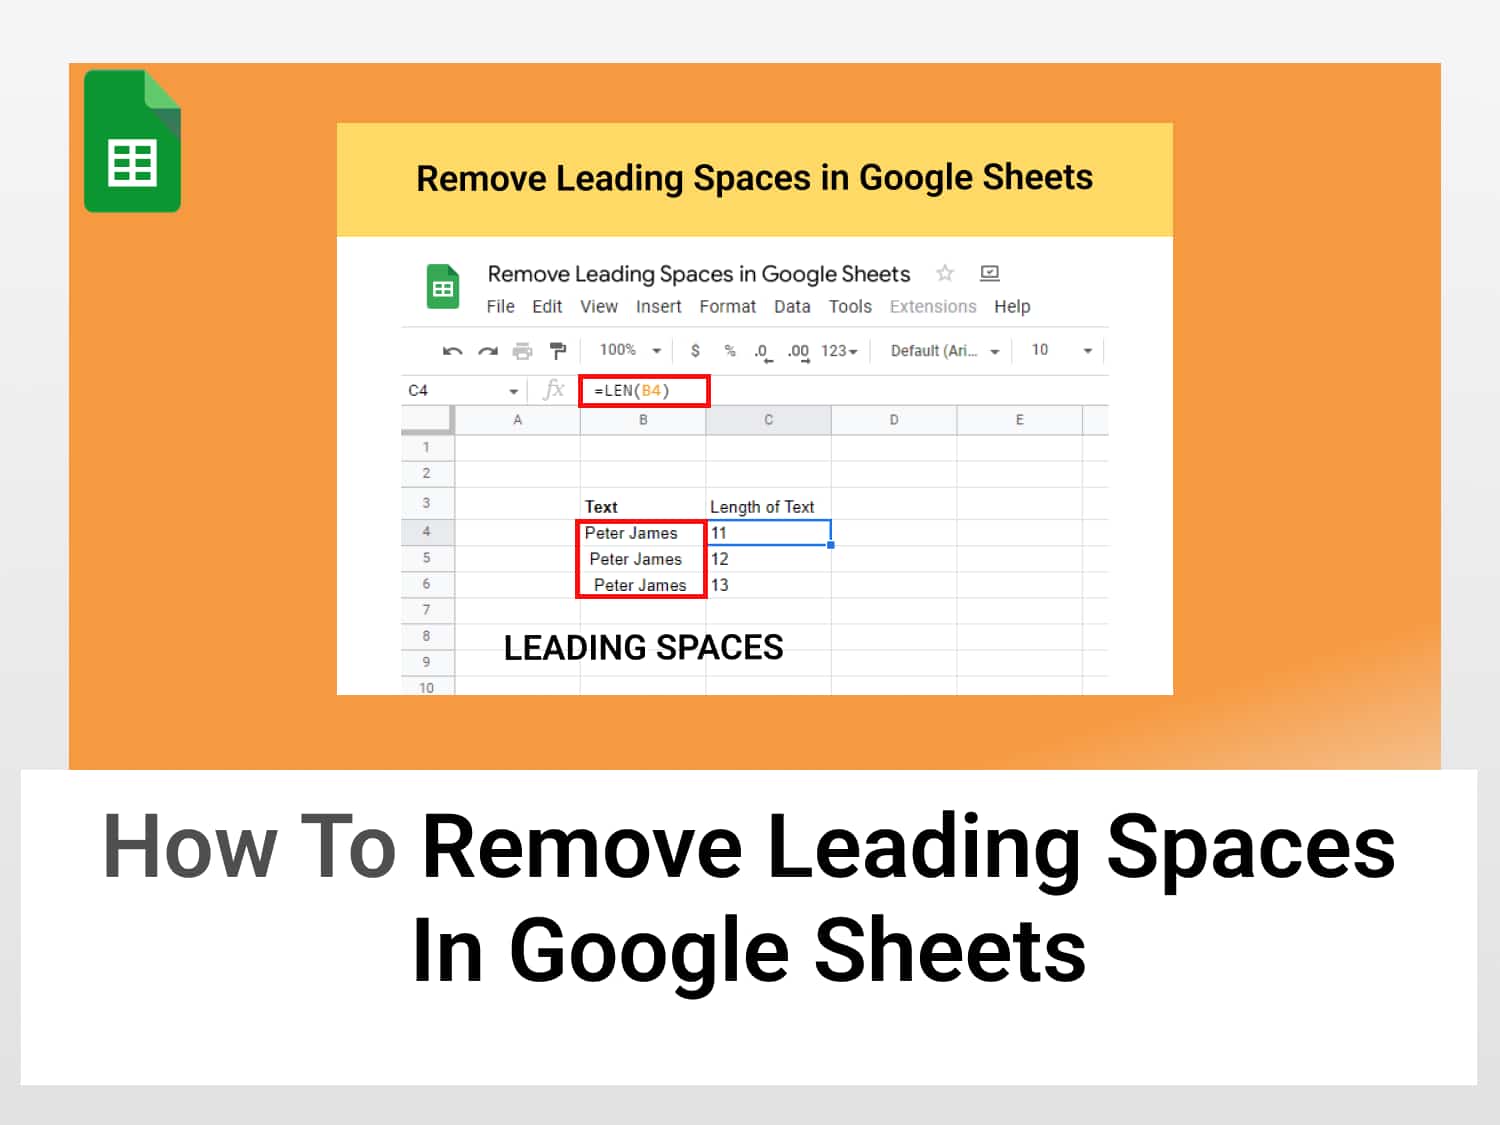 How to remove leading spaces in Google Sheets